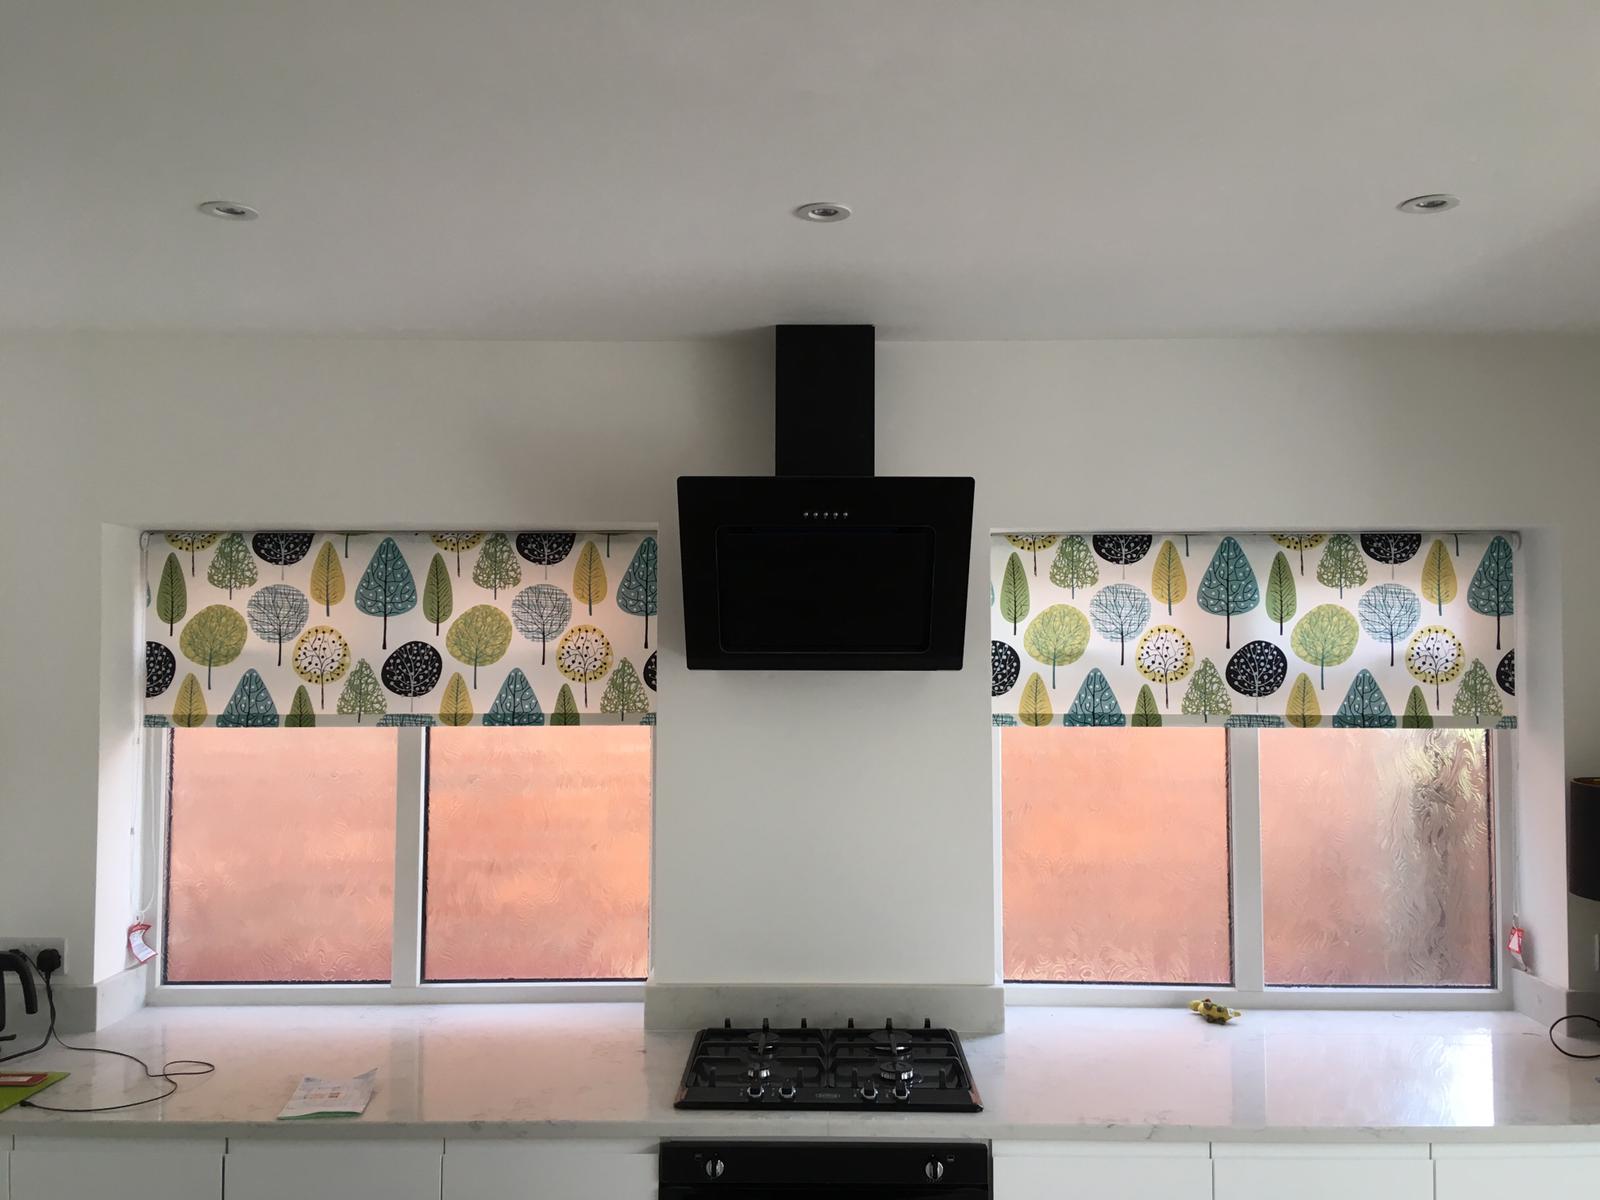 Suppliers of Patterned Roller Blinds Options